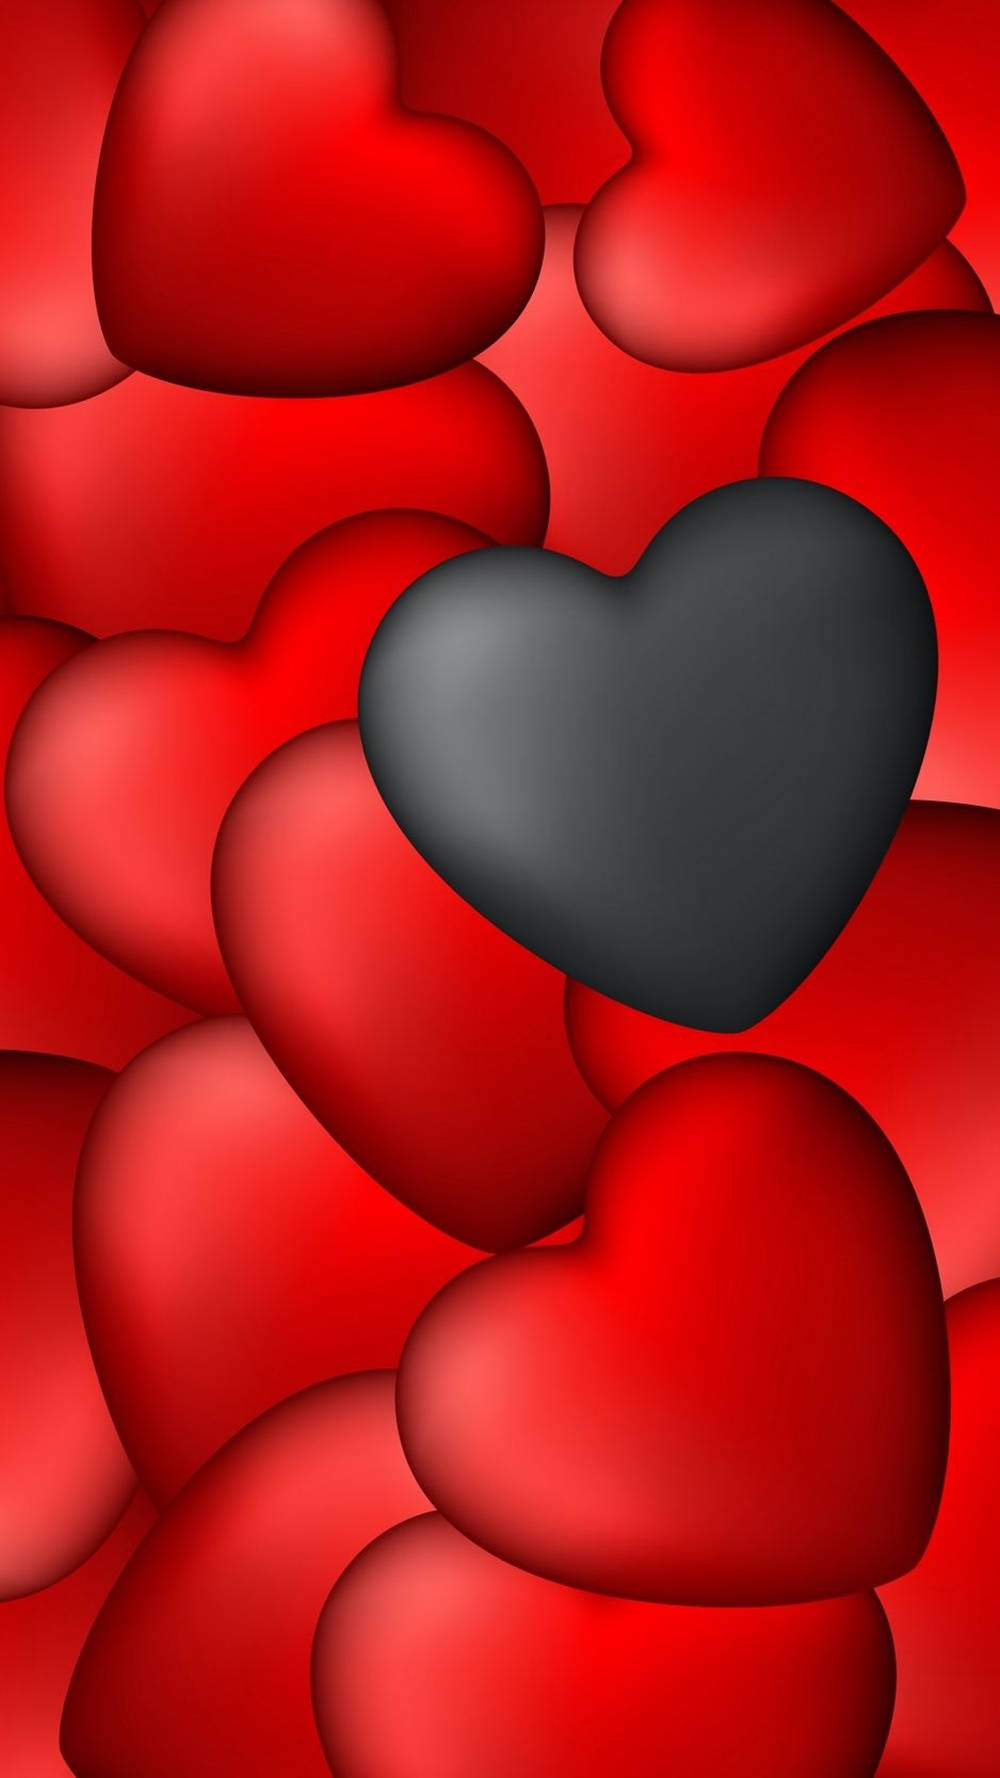 Digital Painting For Heart Iphone Theme Wallpaper